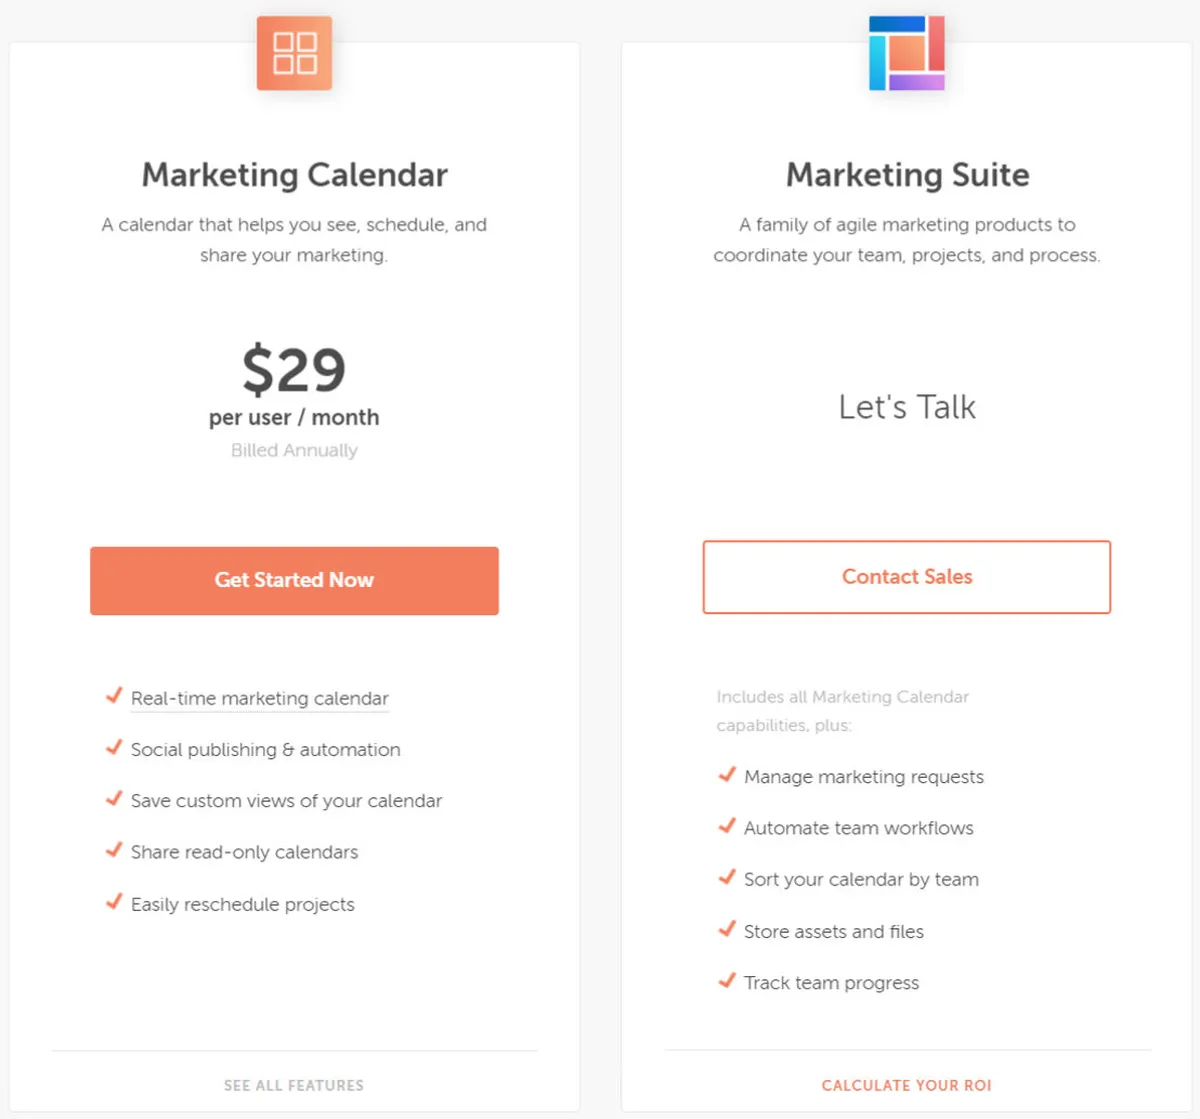 Coschedule Pricing Plan